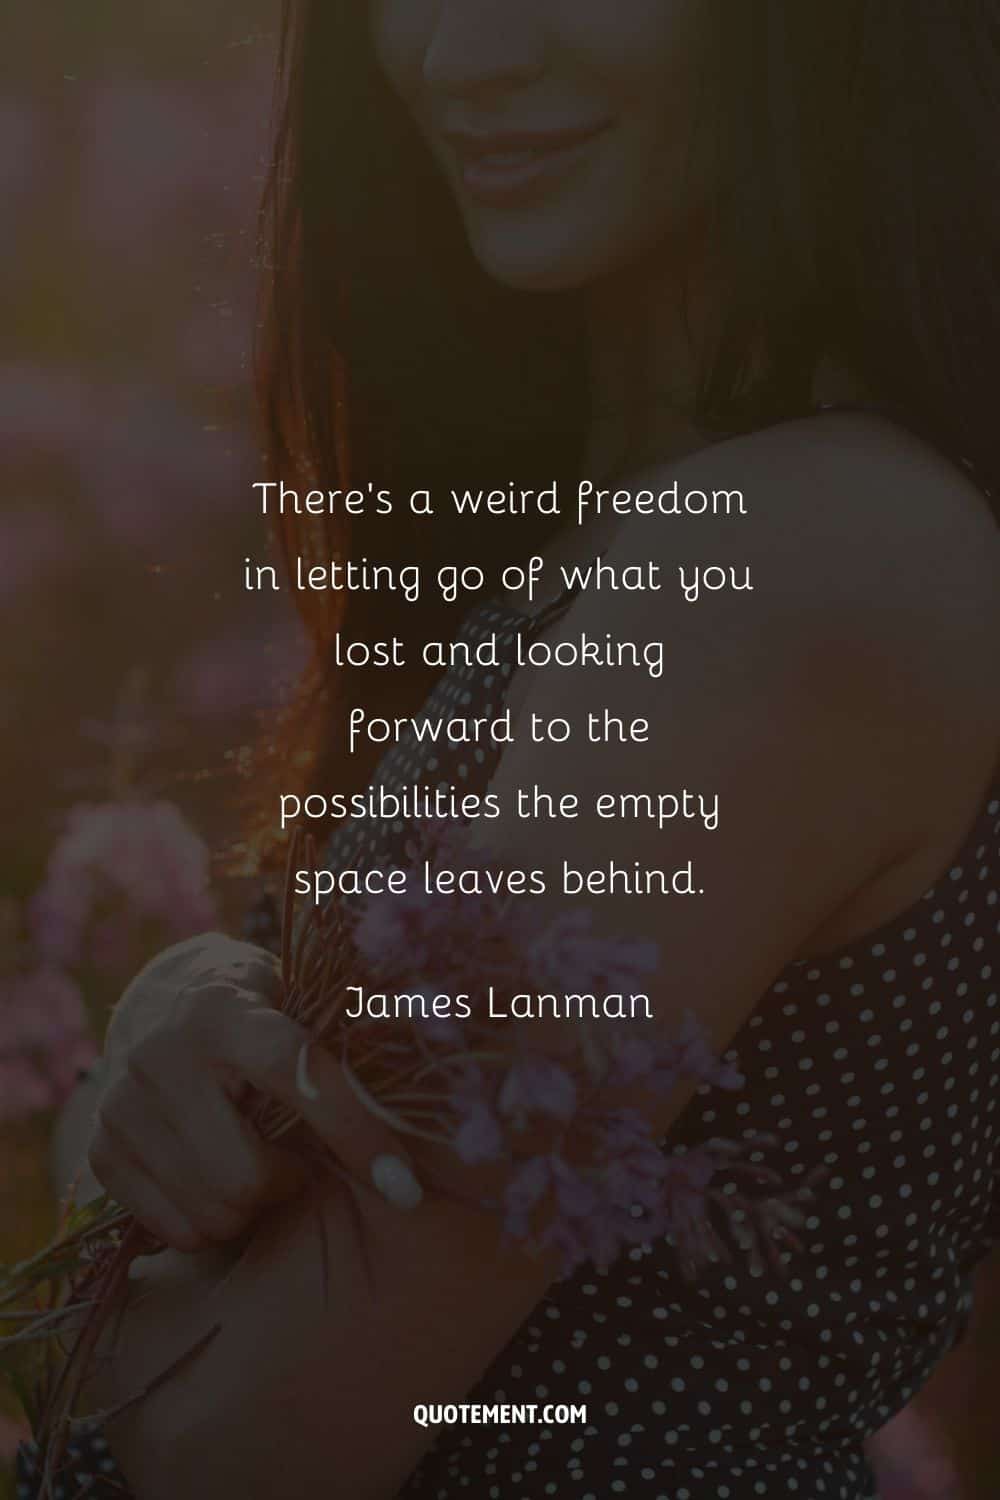 “There’s a weird freedom in letting go of what you lost and looking forward to the possibilities the empty space leaves behind.” ― James Lanman